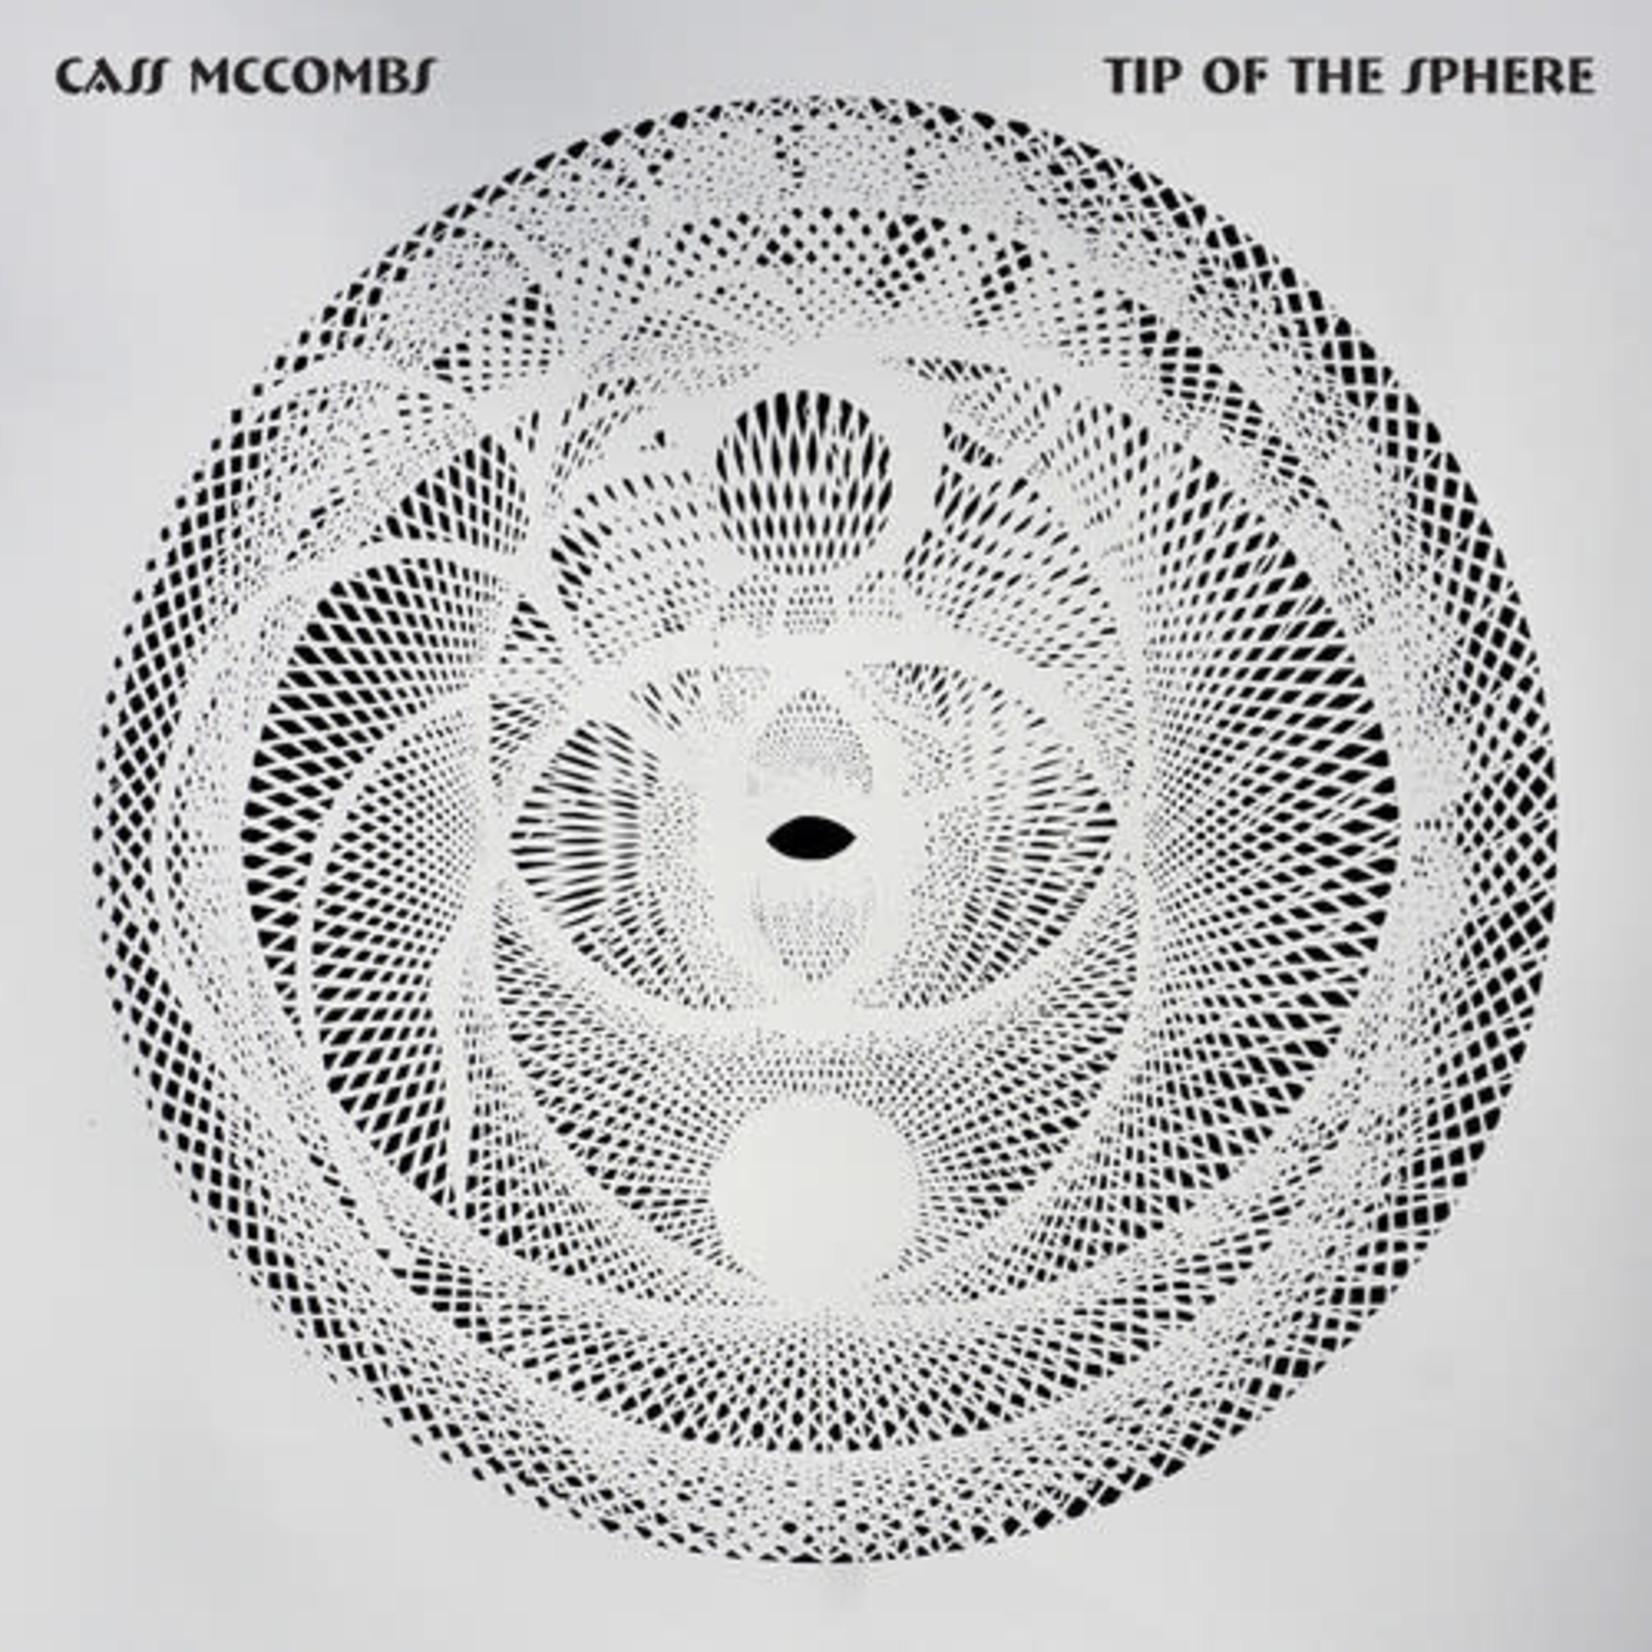 ANTI- Cass McCombs - Tip Of The Sphere (2LP) [Deluxe]